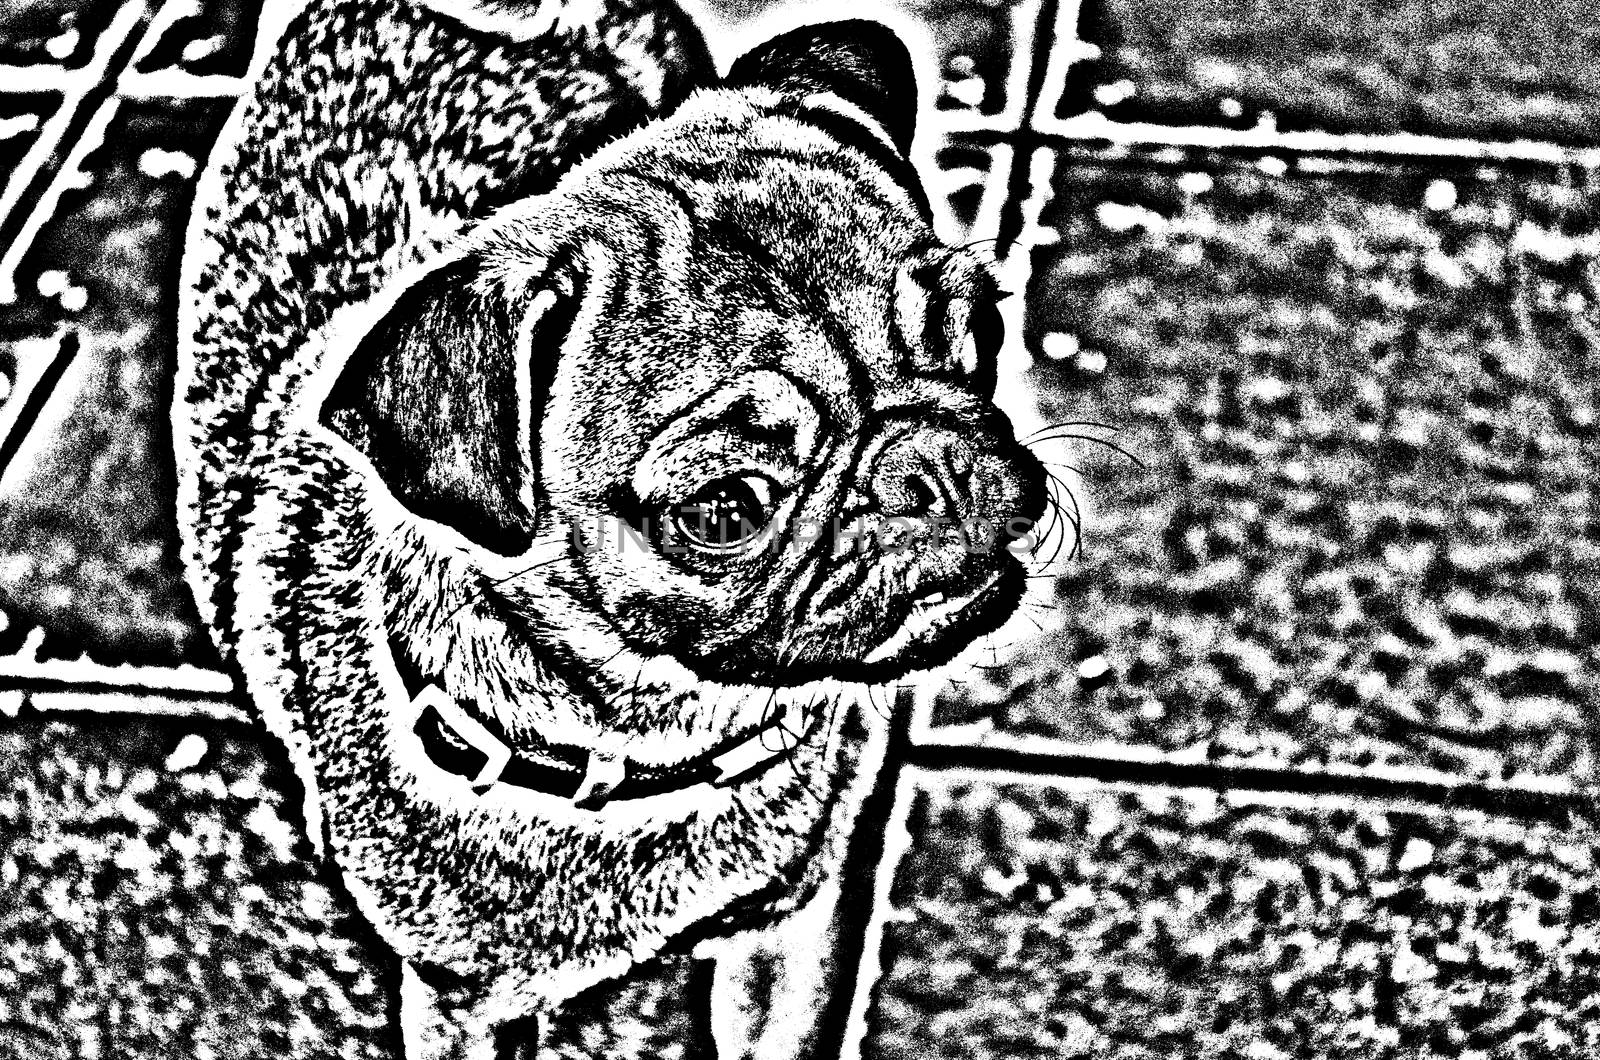 Cute Dog Series 1 No.1,made from photo by photoshop.